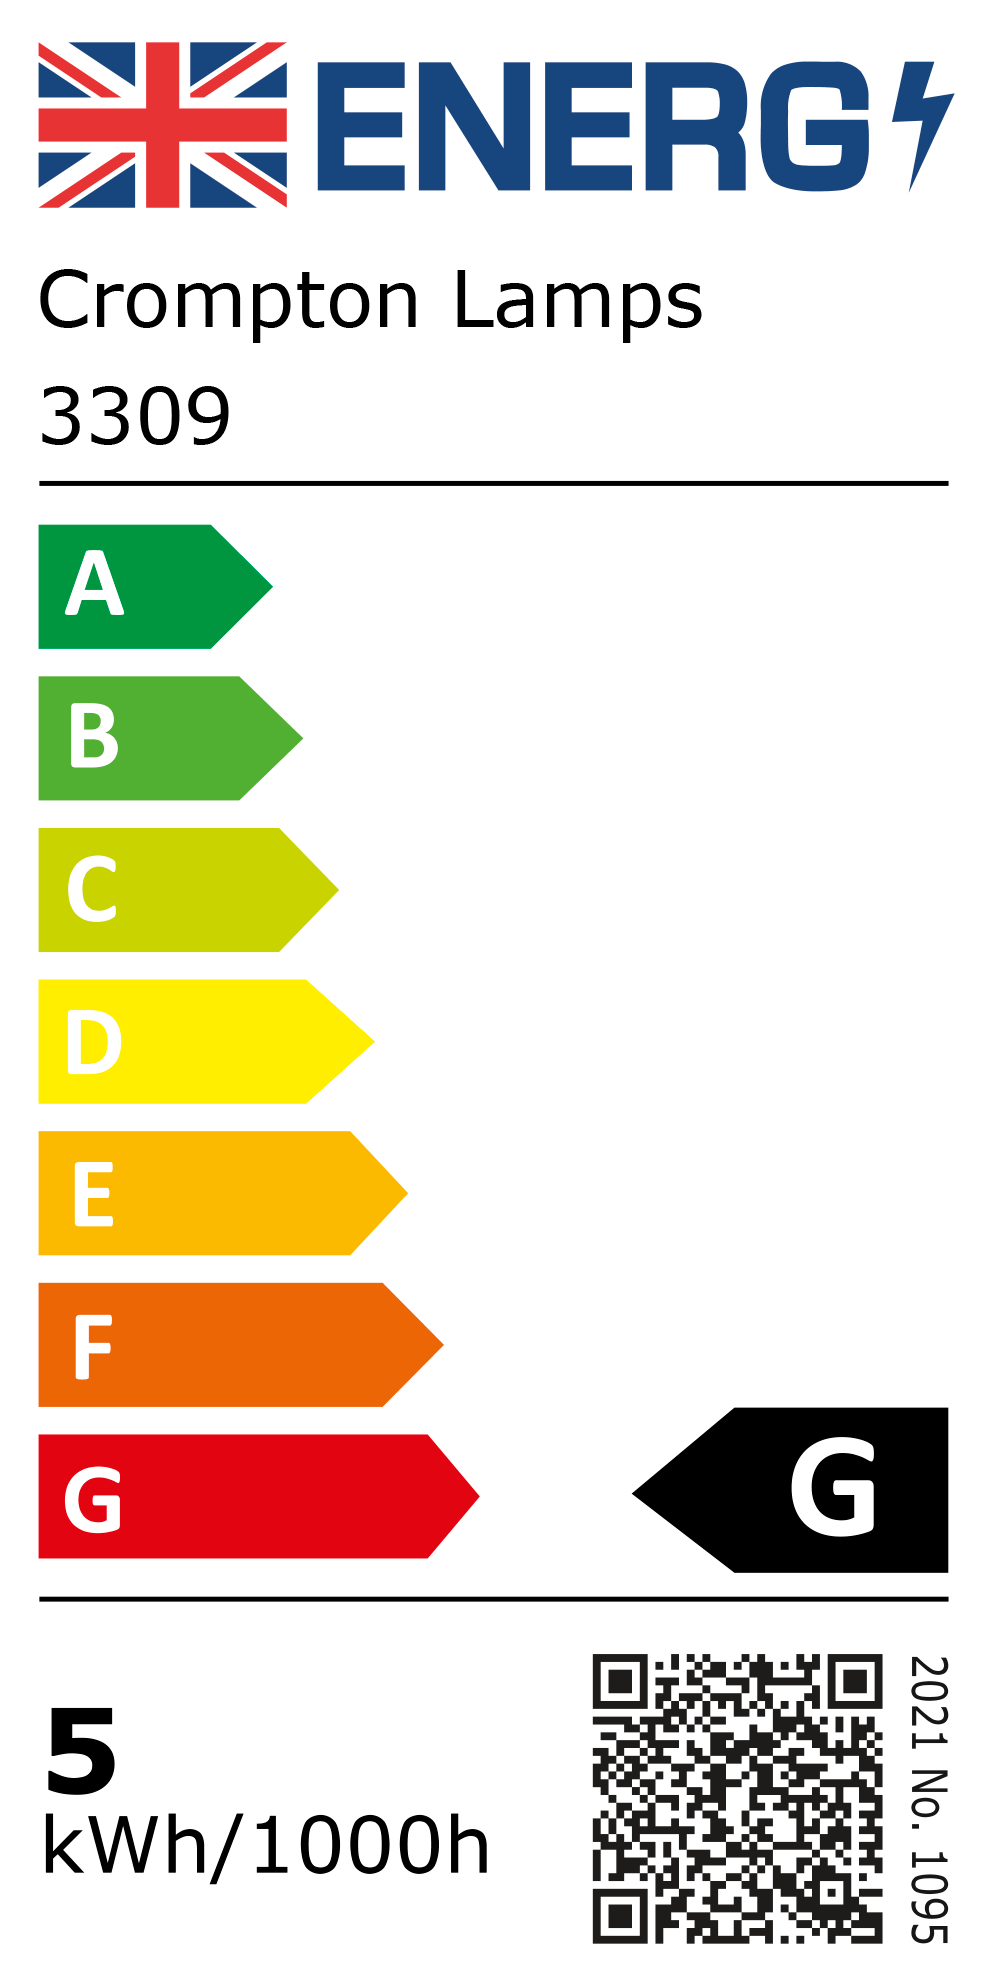 New 2021 Energy Rating Label: Stock Code 3309